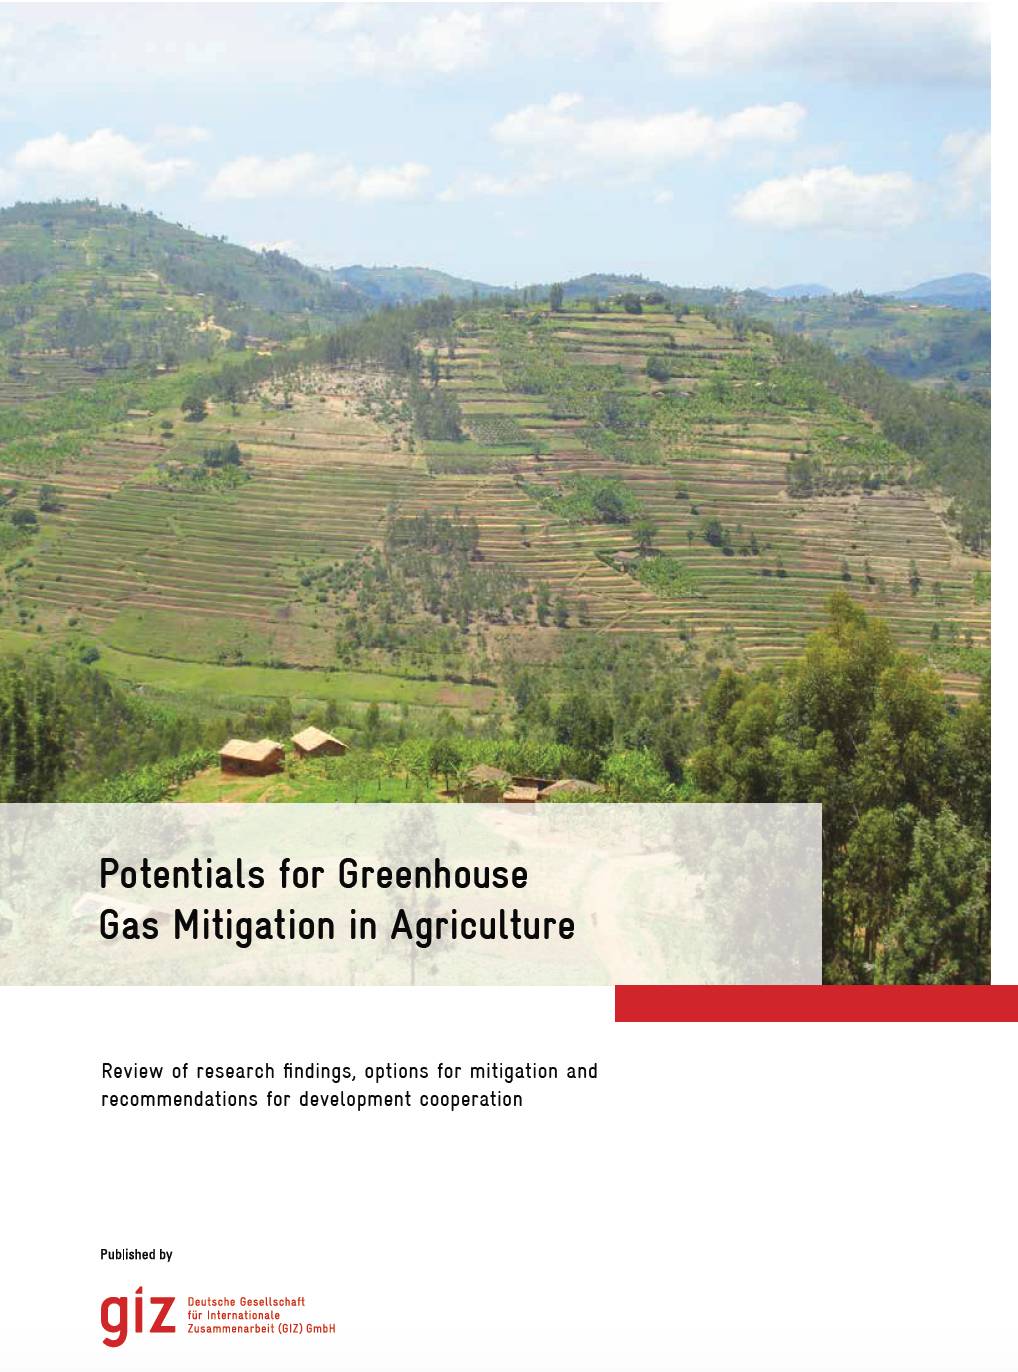 Potentials for Greenhouse Gas Mitigation in Agriculture